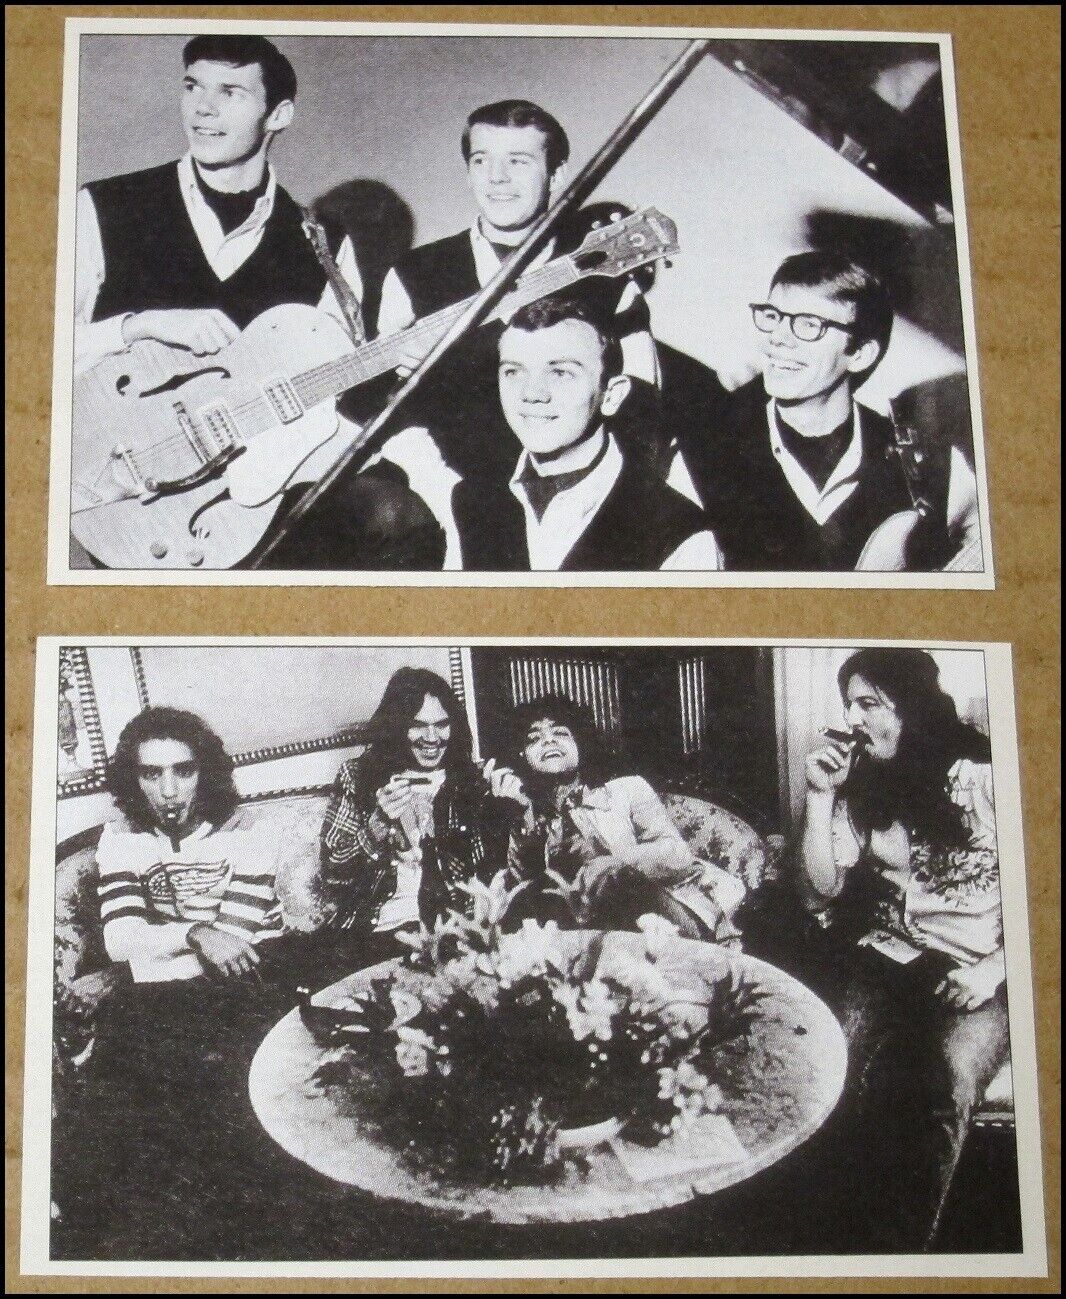 2006 Neil Young RS Photo Clippings The Squires 1964 Crazy Horse 1975 3.5\